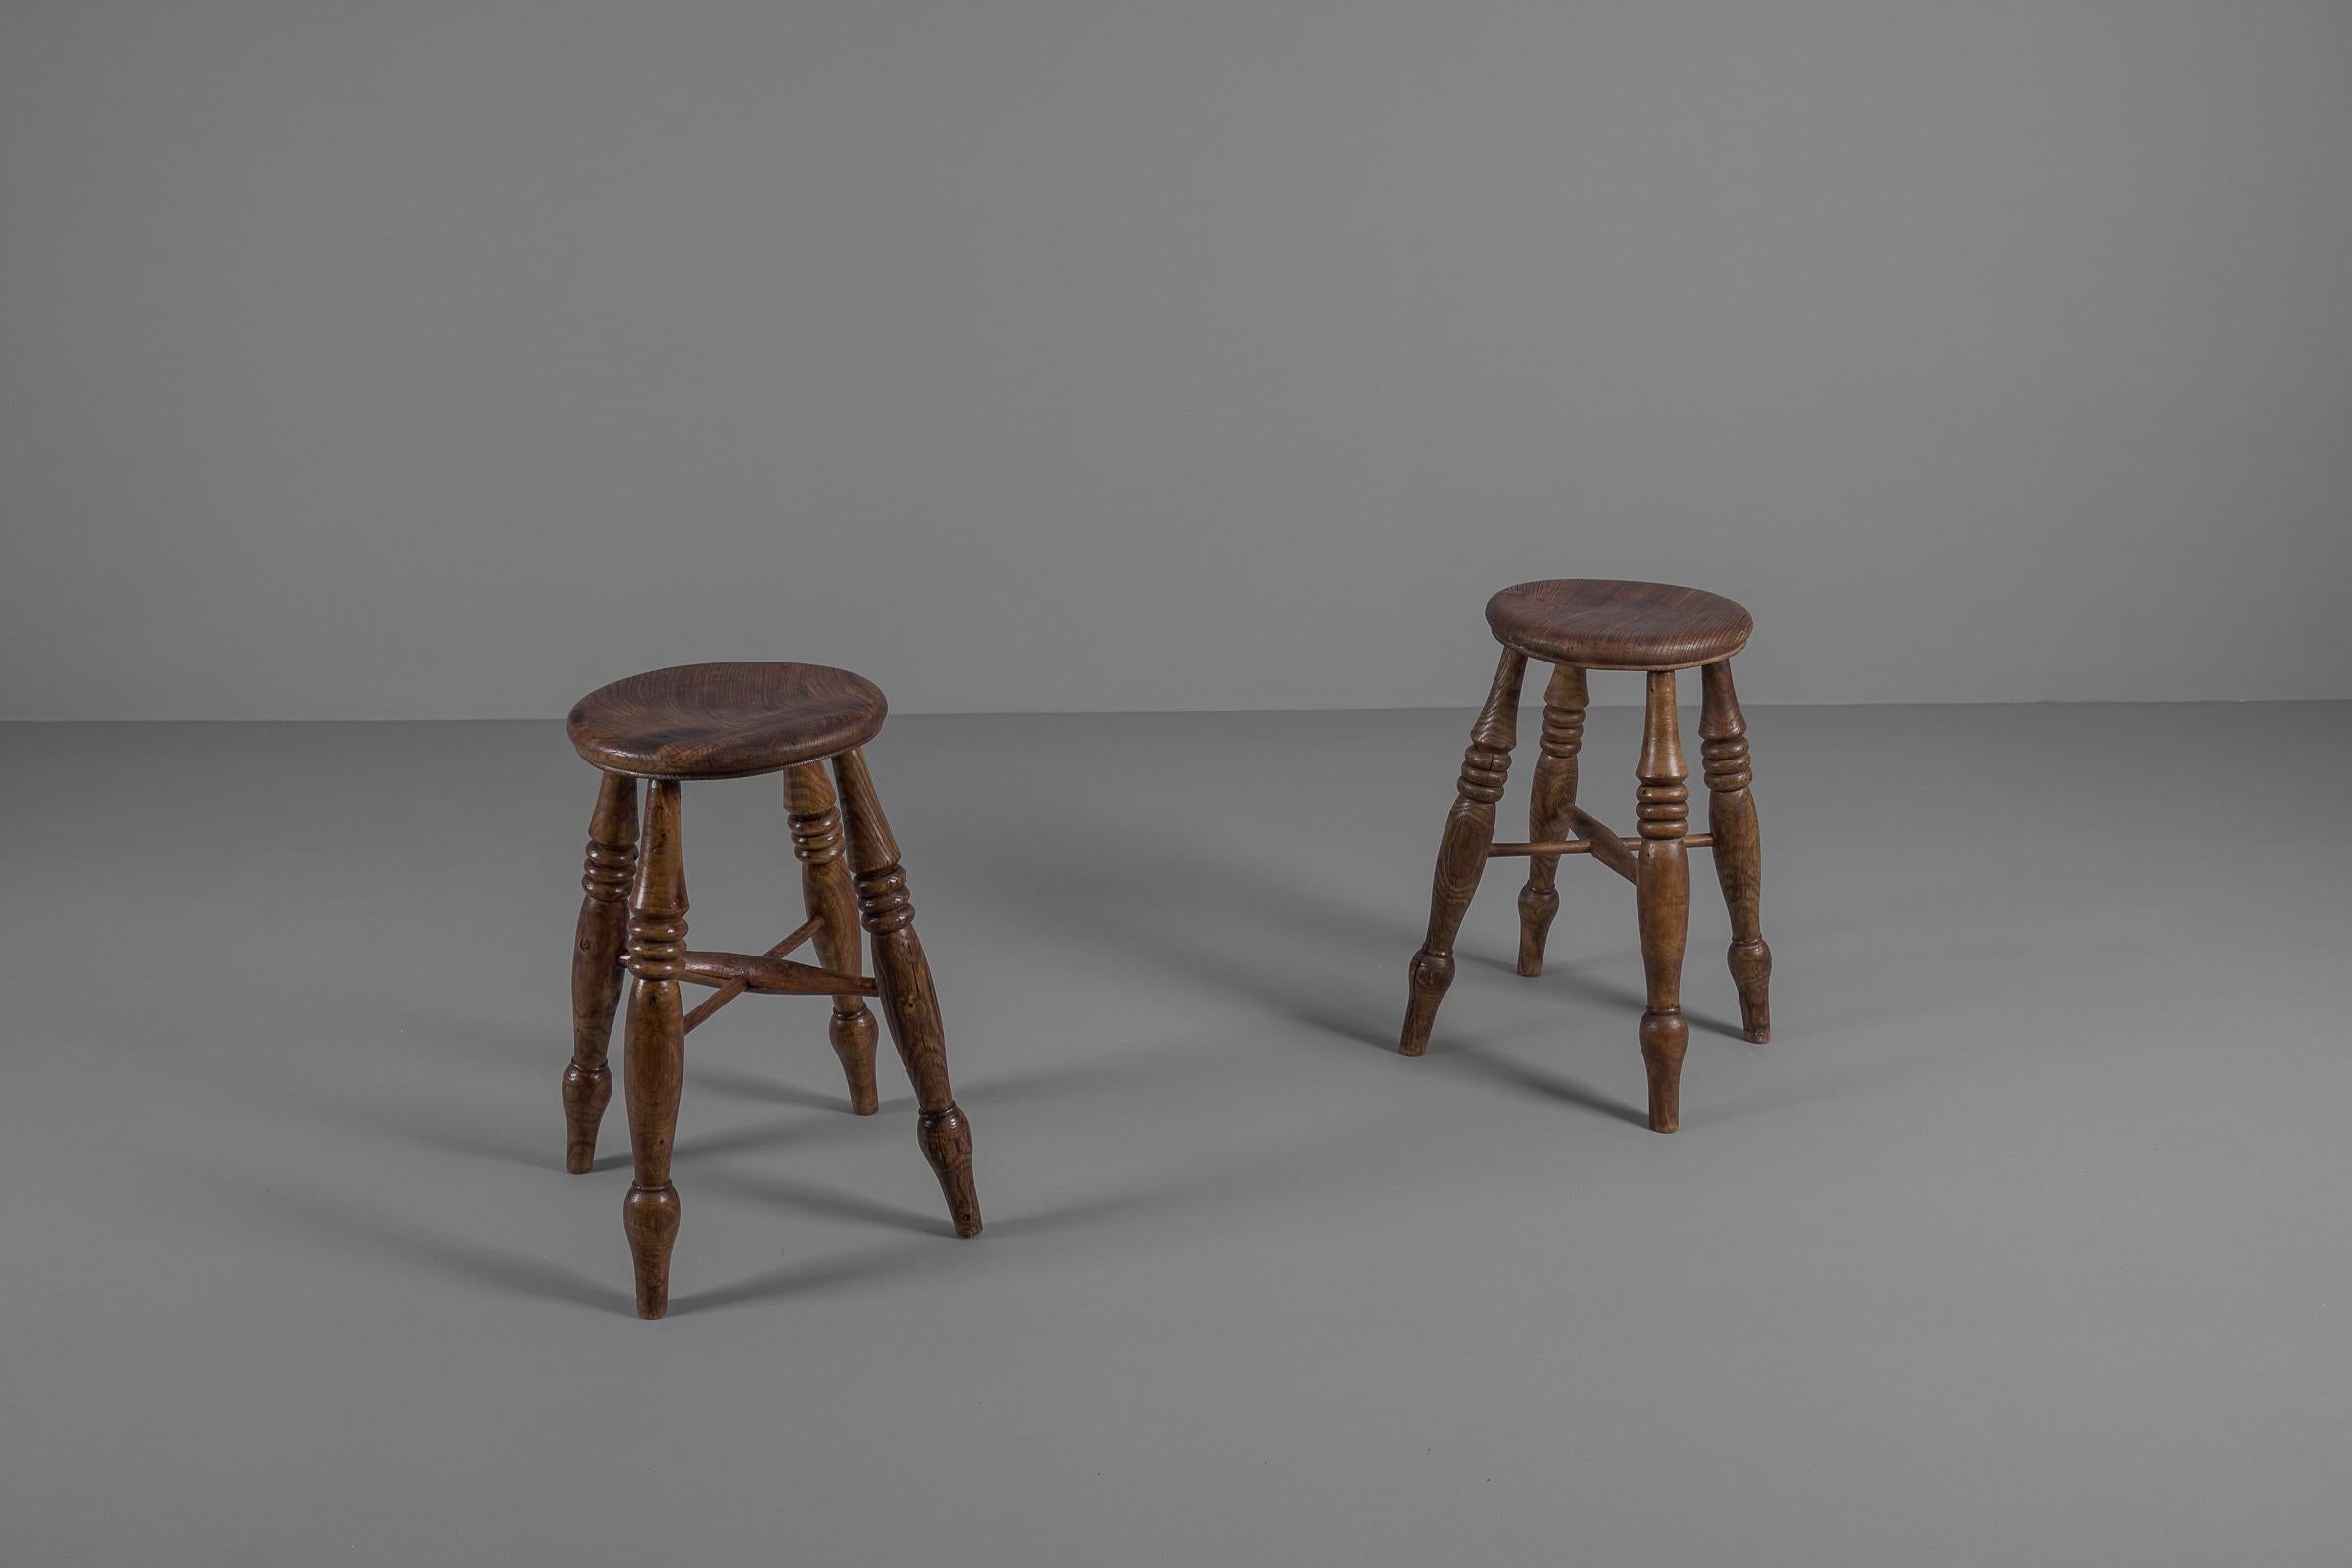 Lacquered Pair of Lovely Old Wooden Stools, 1950s France